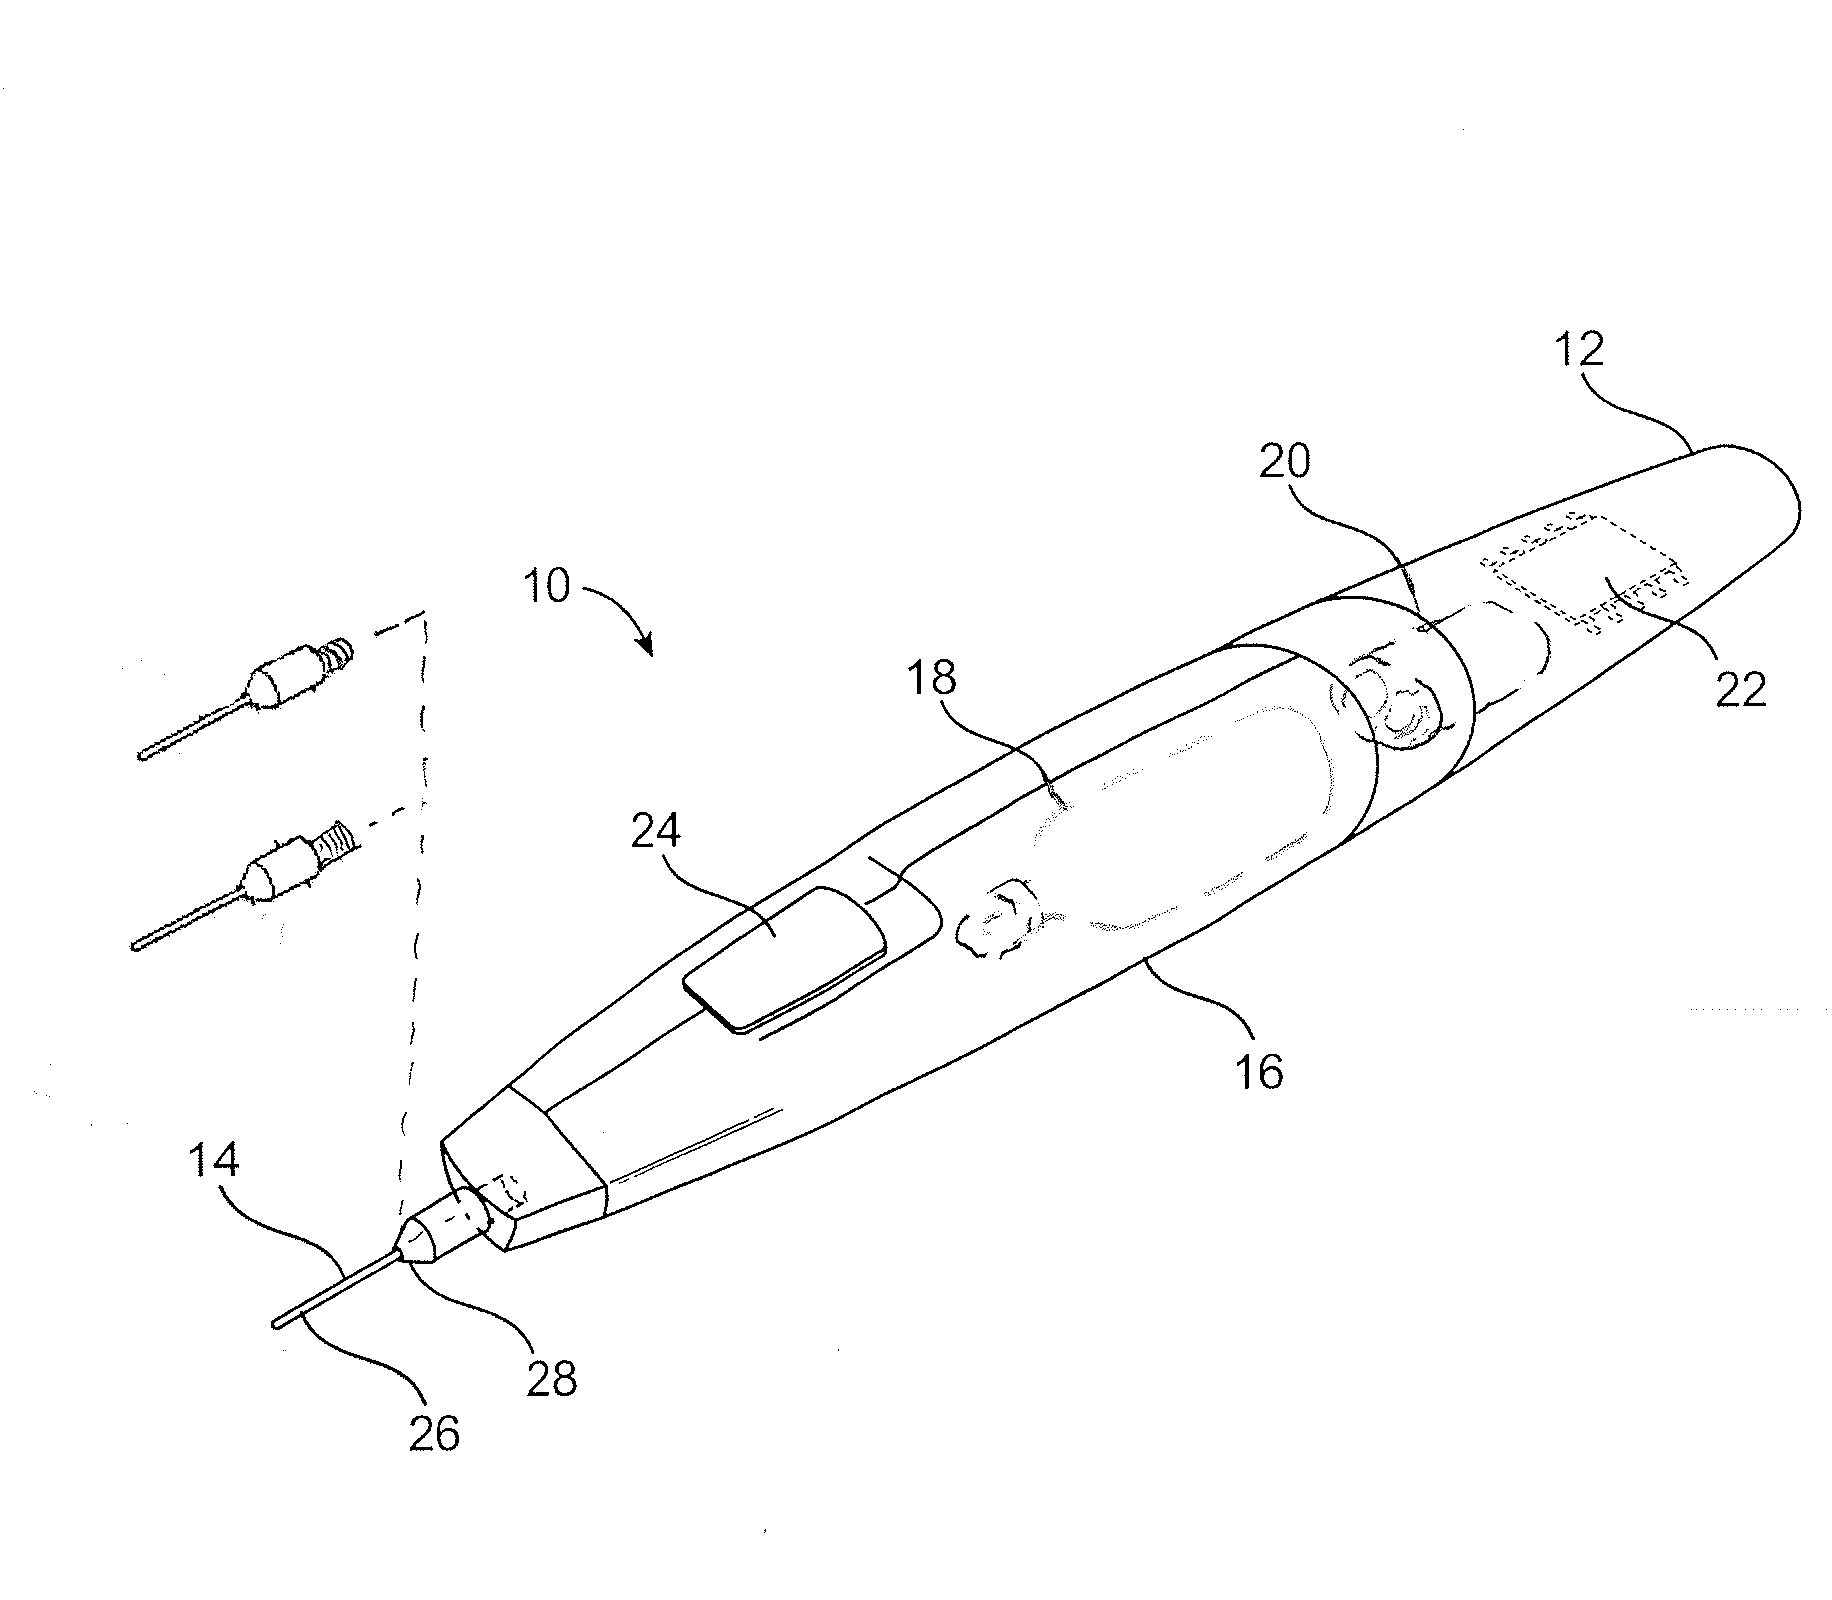 Dermal and Transdermal Cryogenic Microprobe Systems and Methods